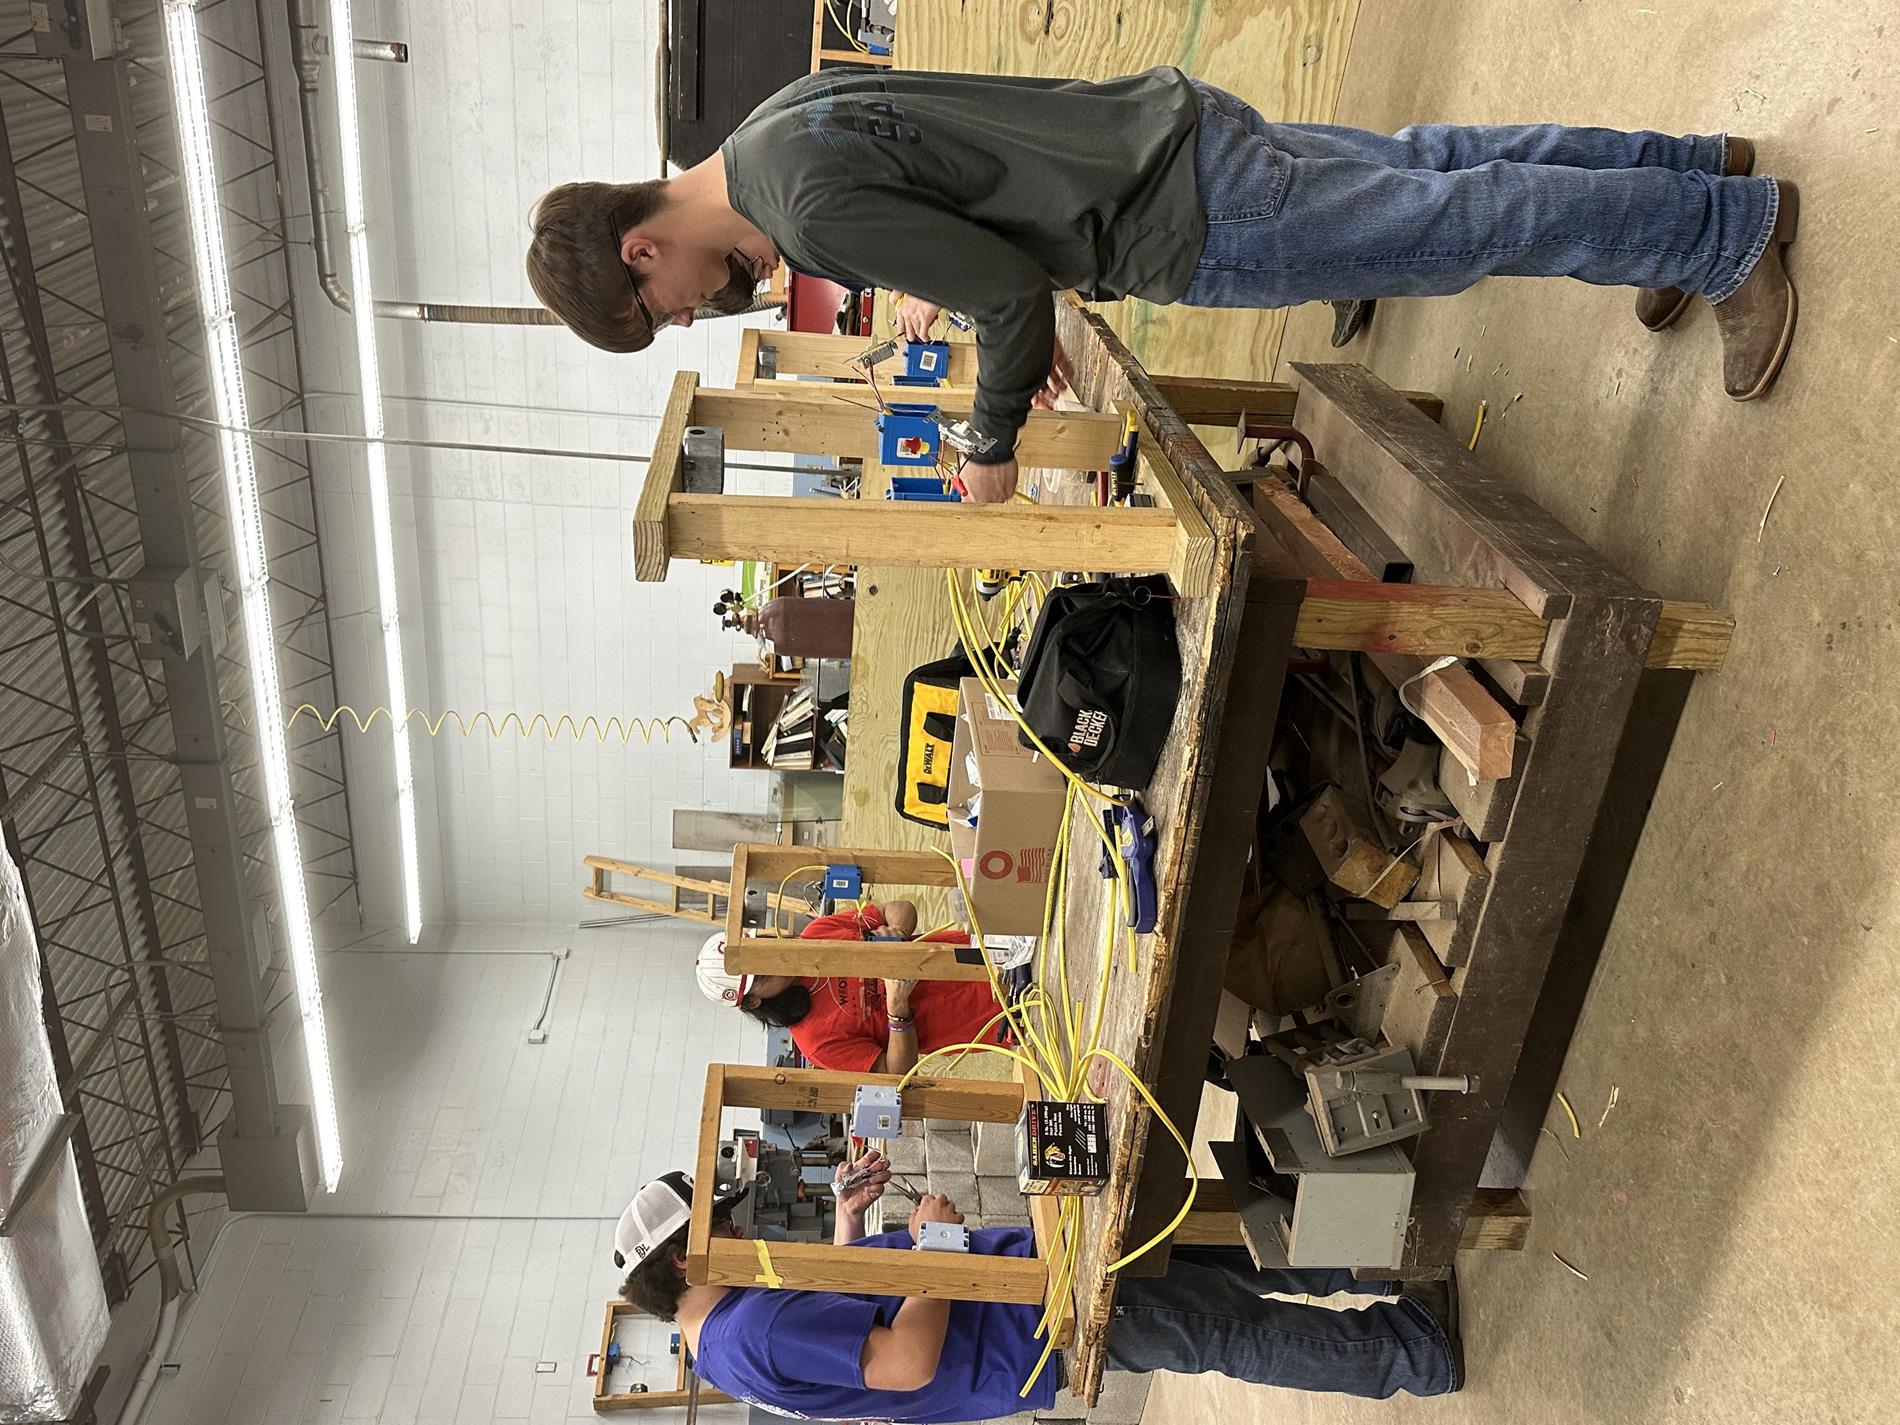 Students working on a carpentry project